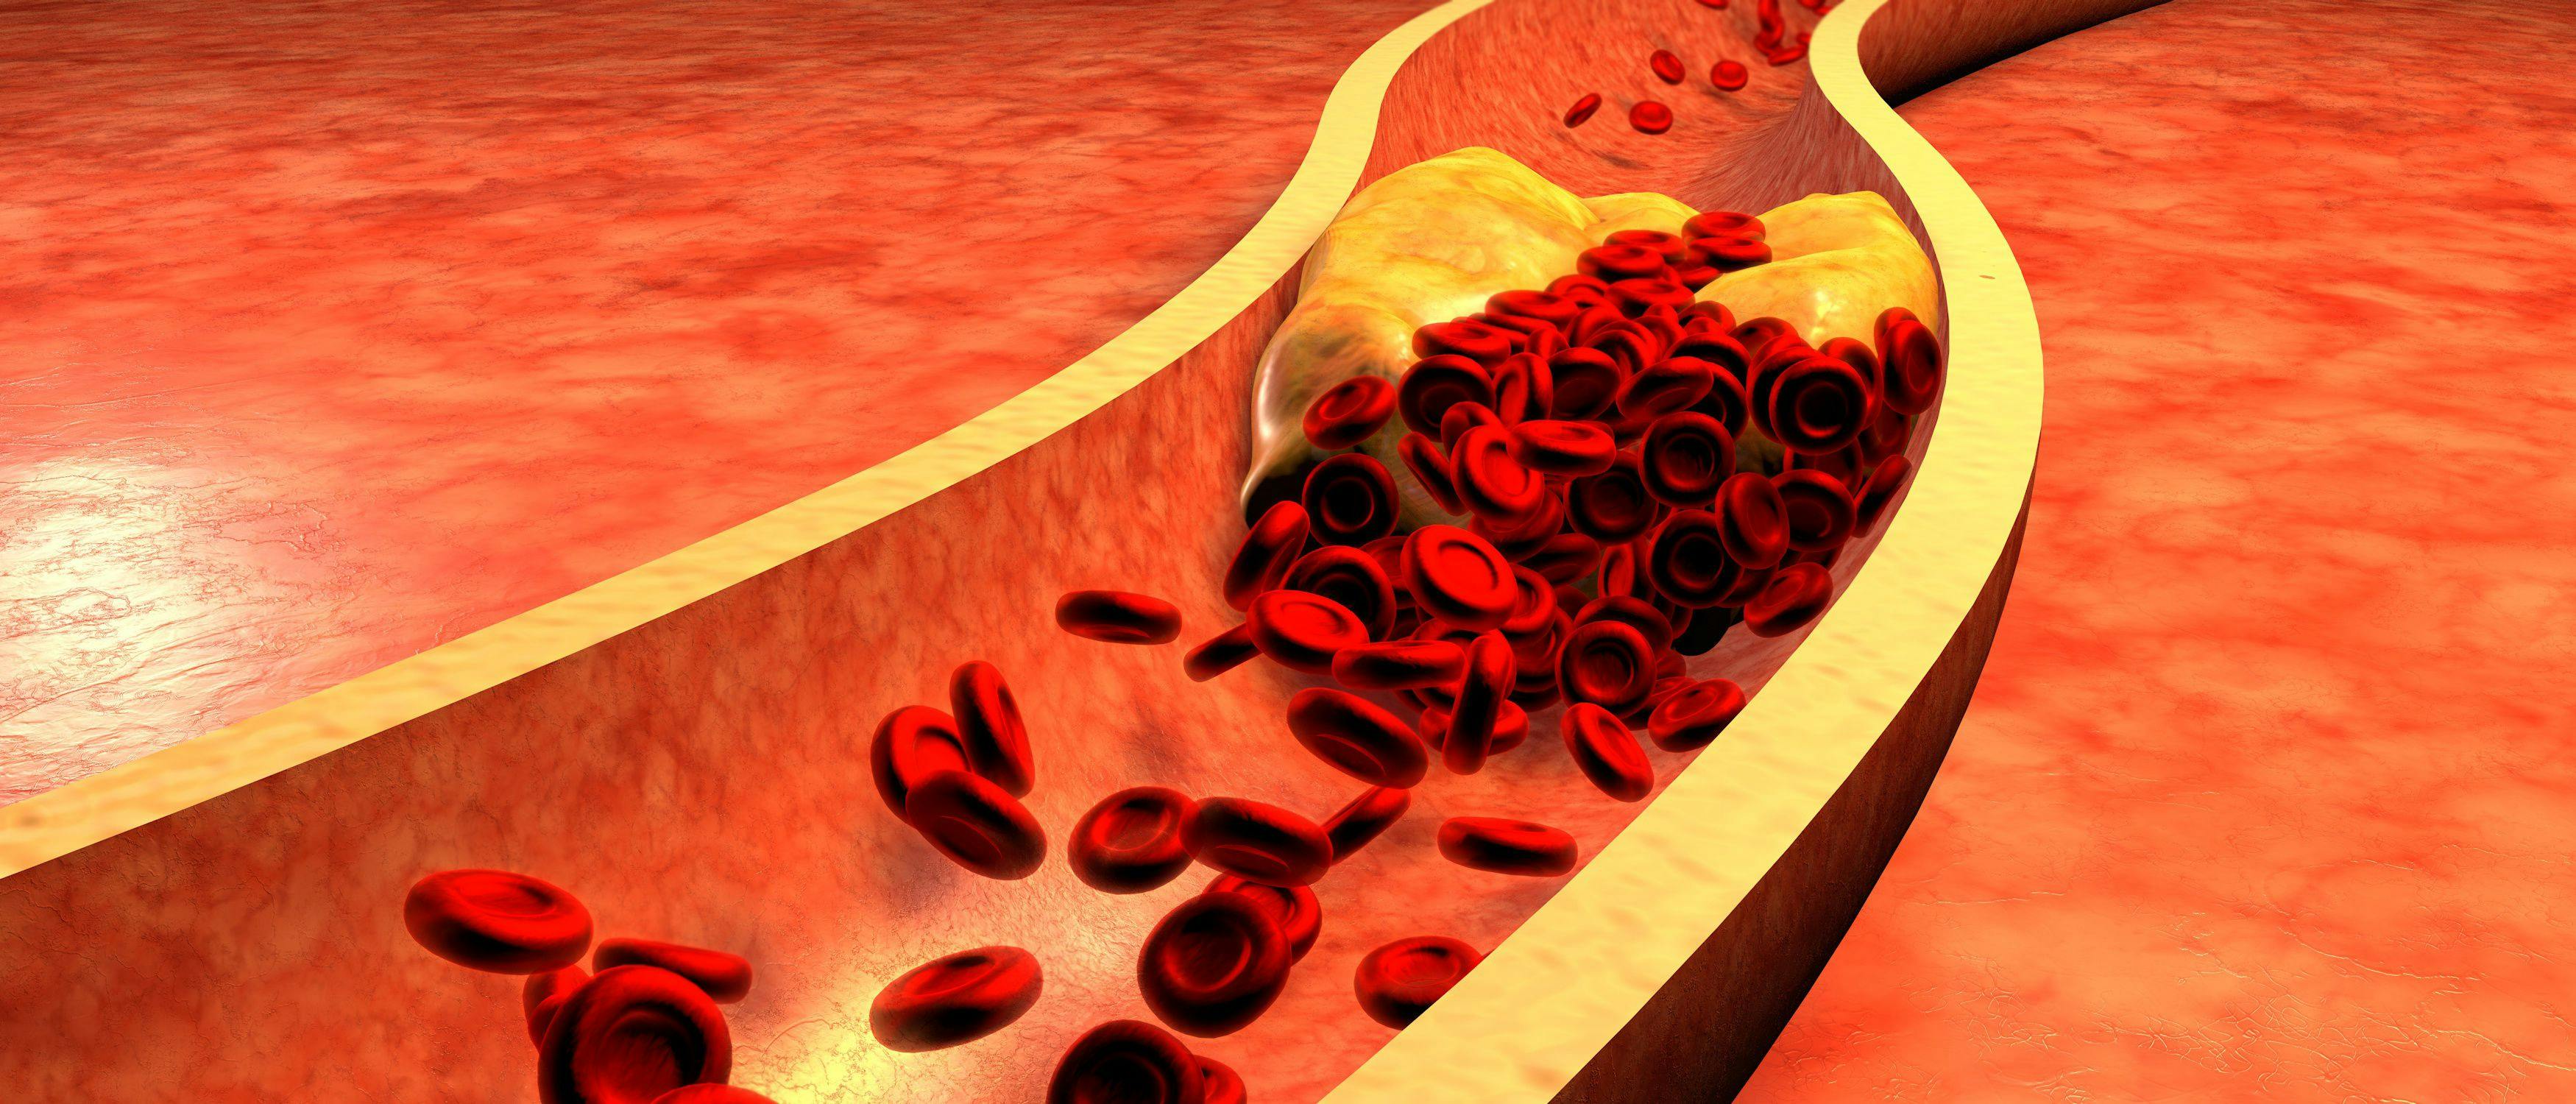 Clogged Artery with platelets and cholesterol plaque. (©Ralwe, AdobeStock.com)